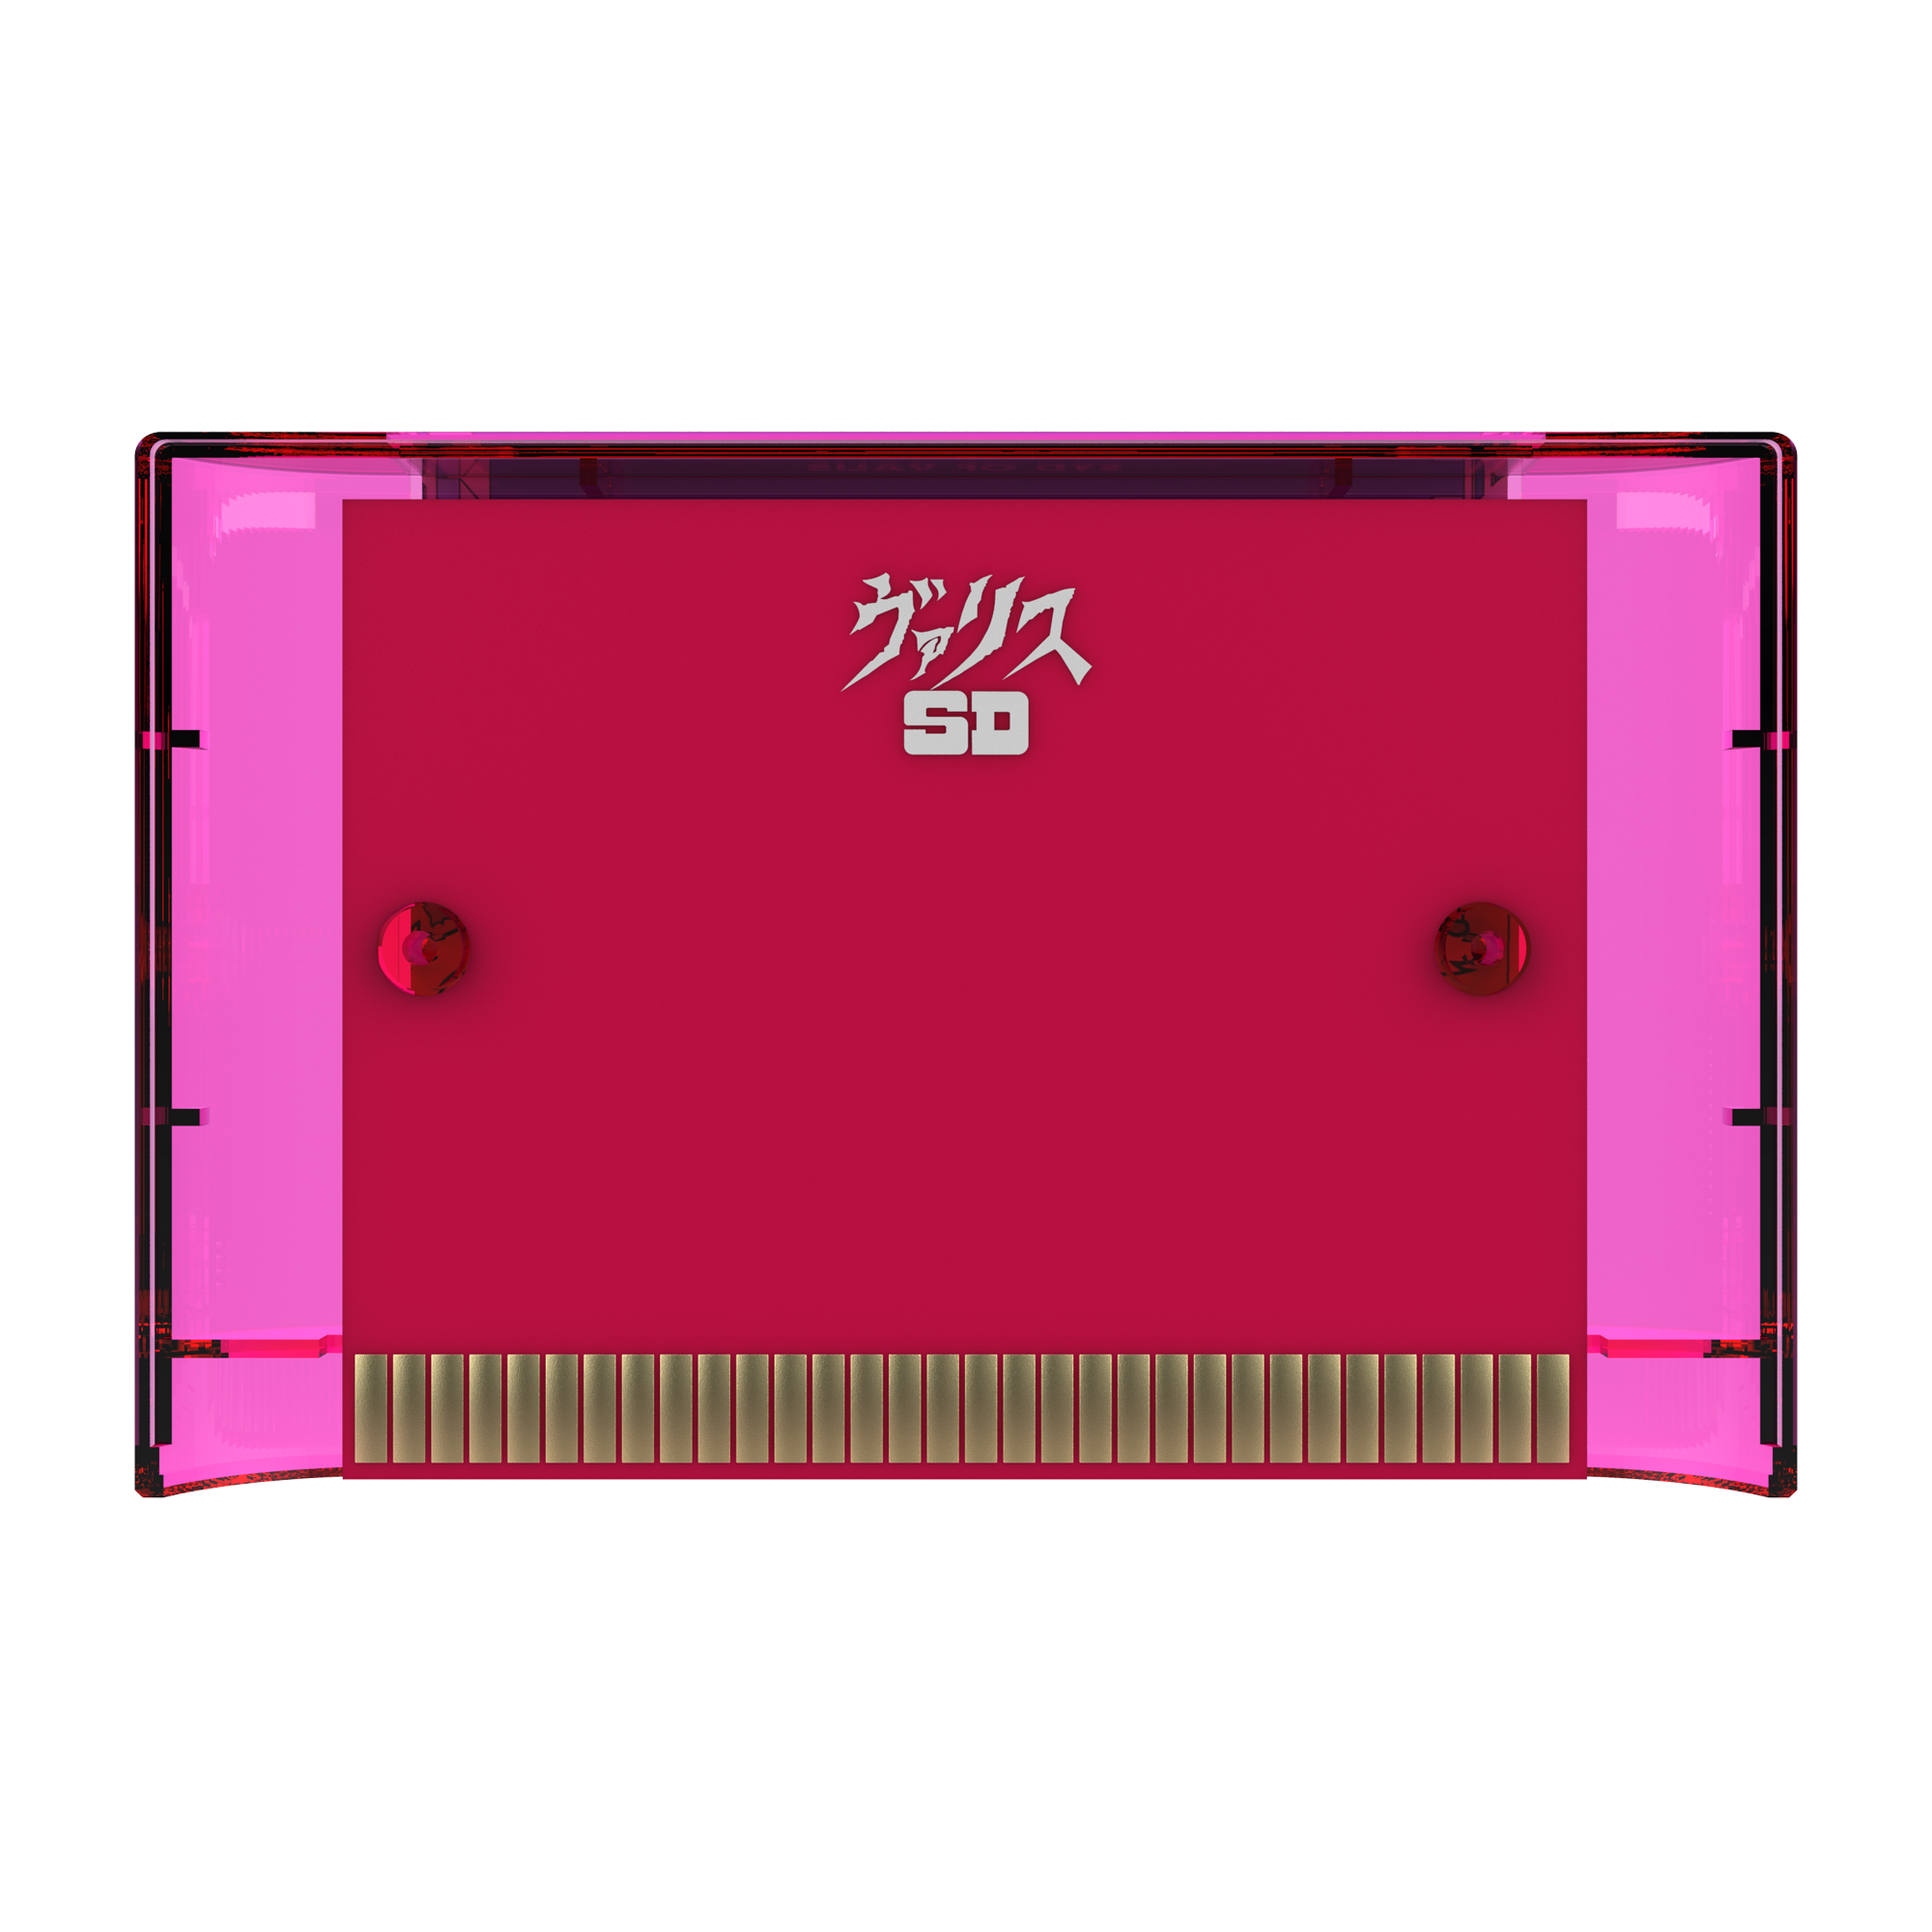 ValisCollectionPressKit Syd of Valis Cartridge 03.png